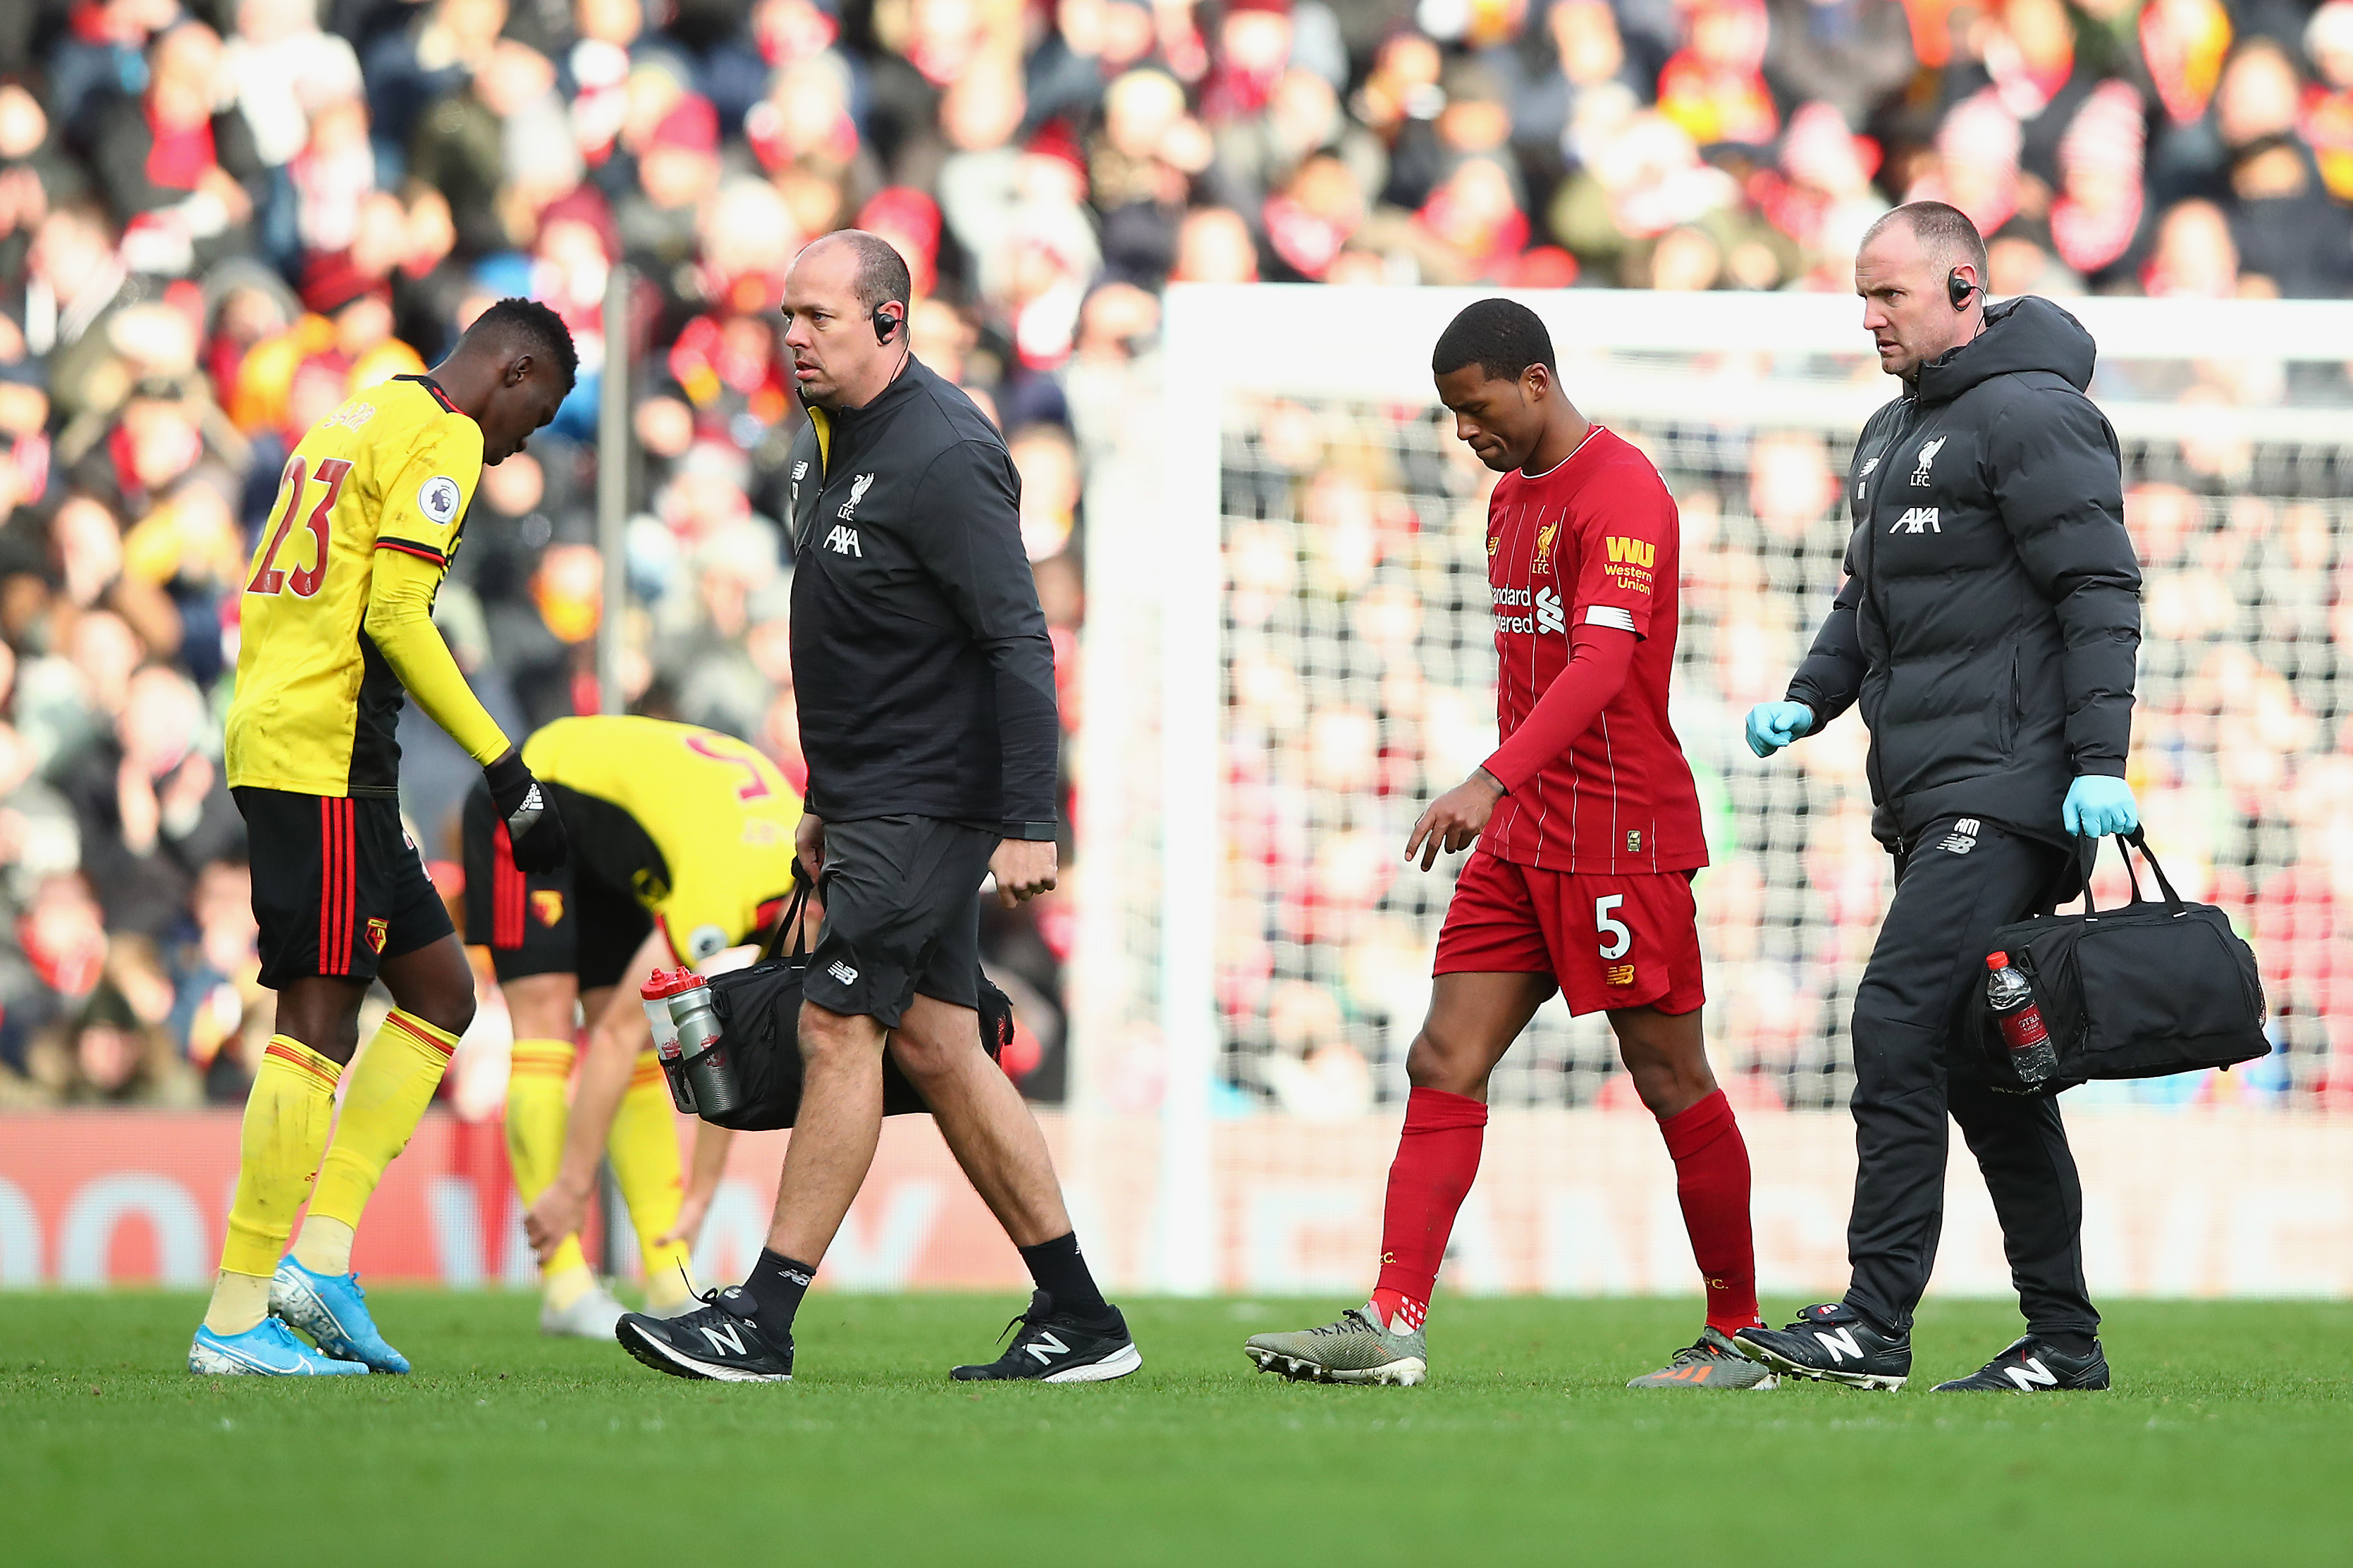 A concerning image for Liverpool fans. (Photo by Clive Brunskill/Getty Images)